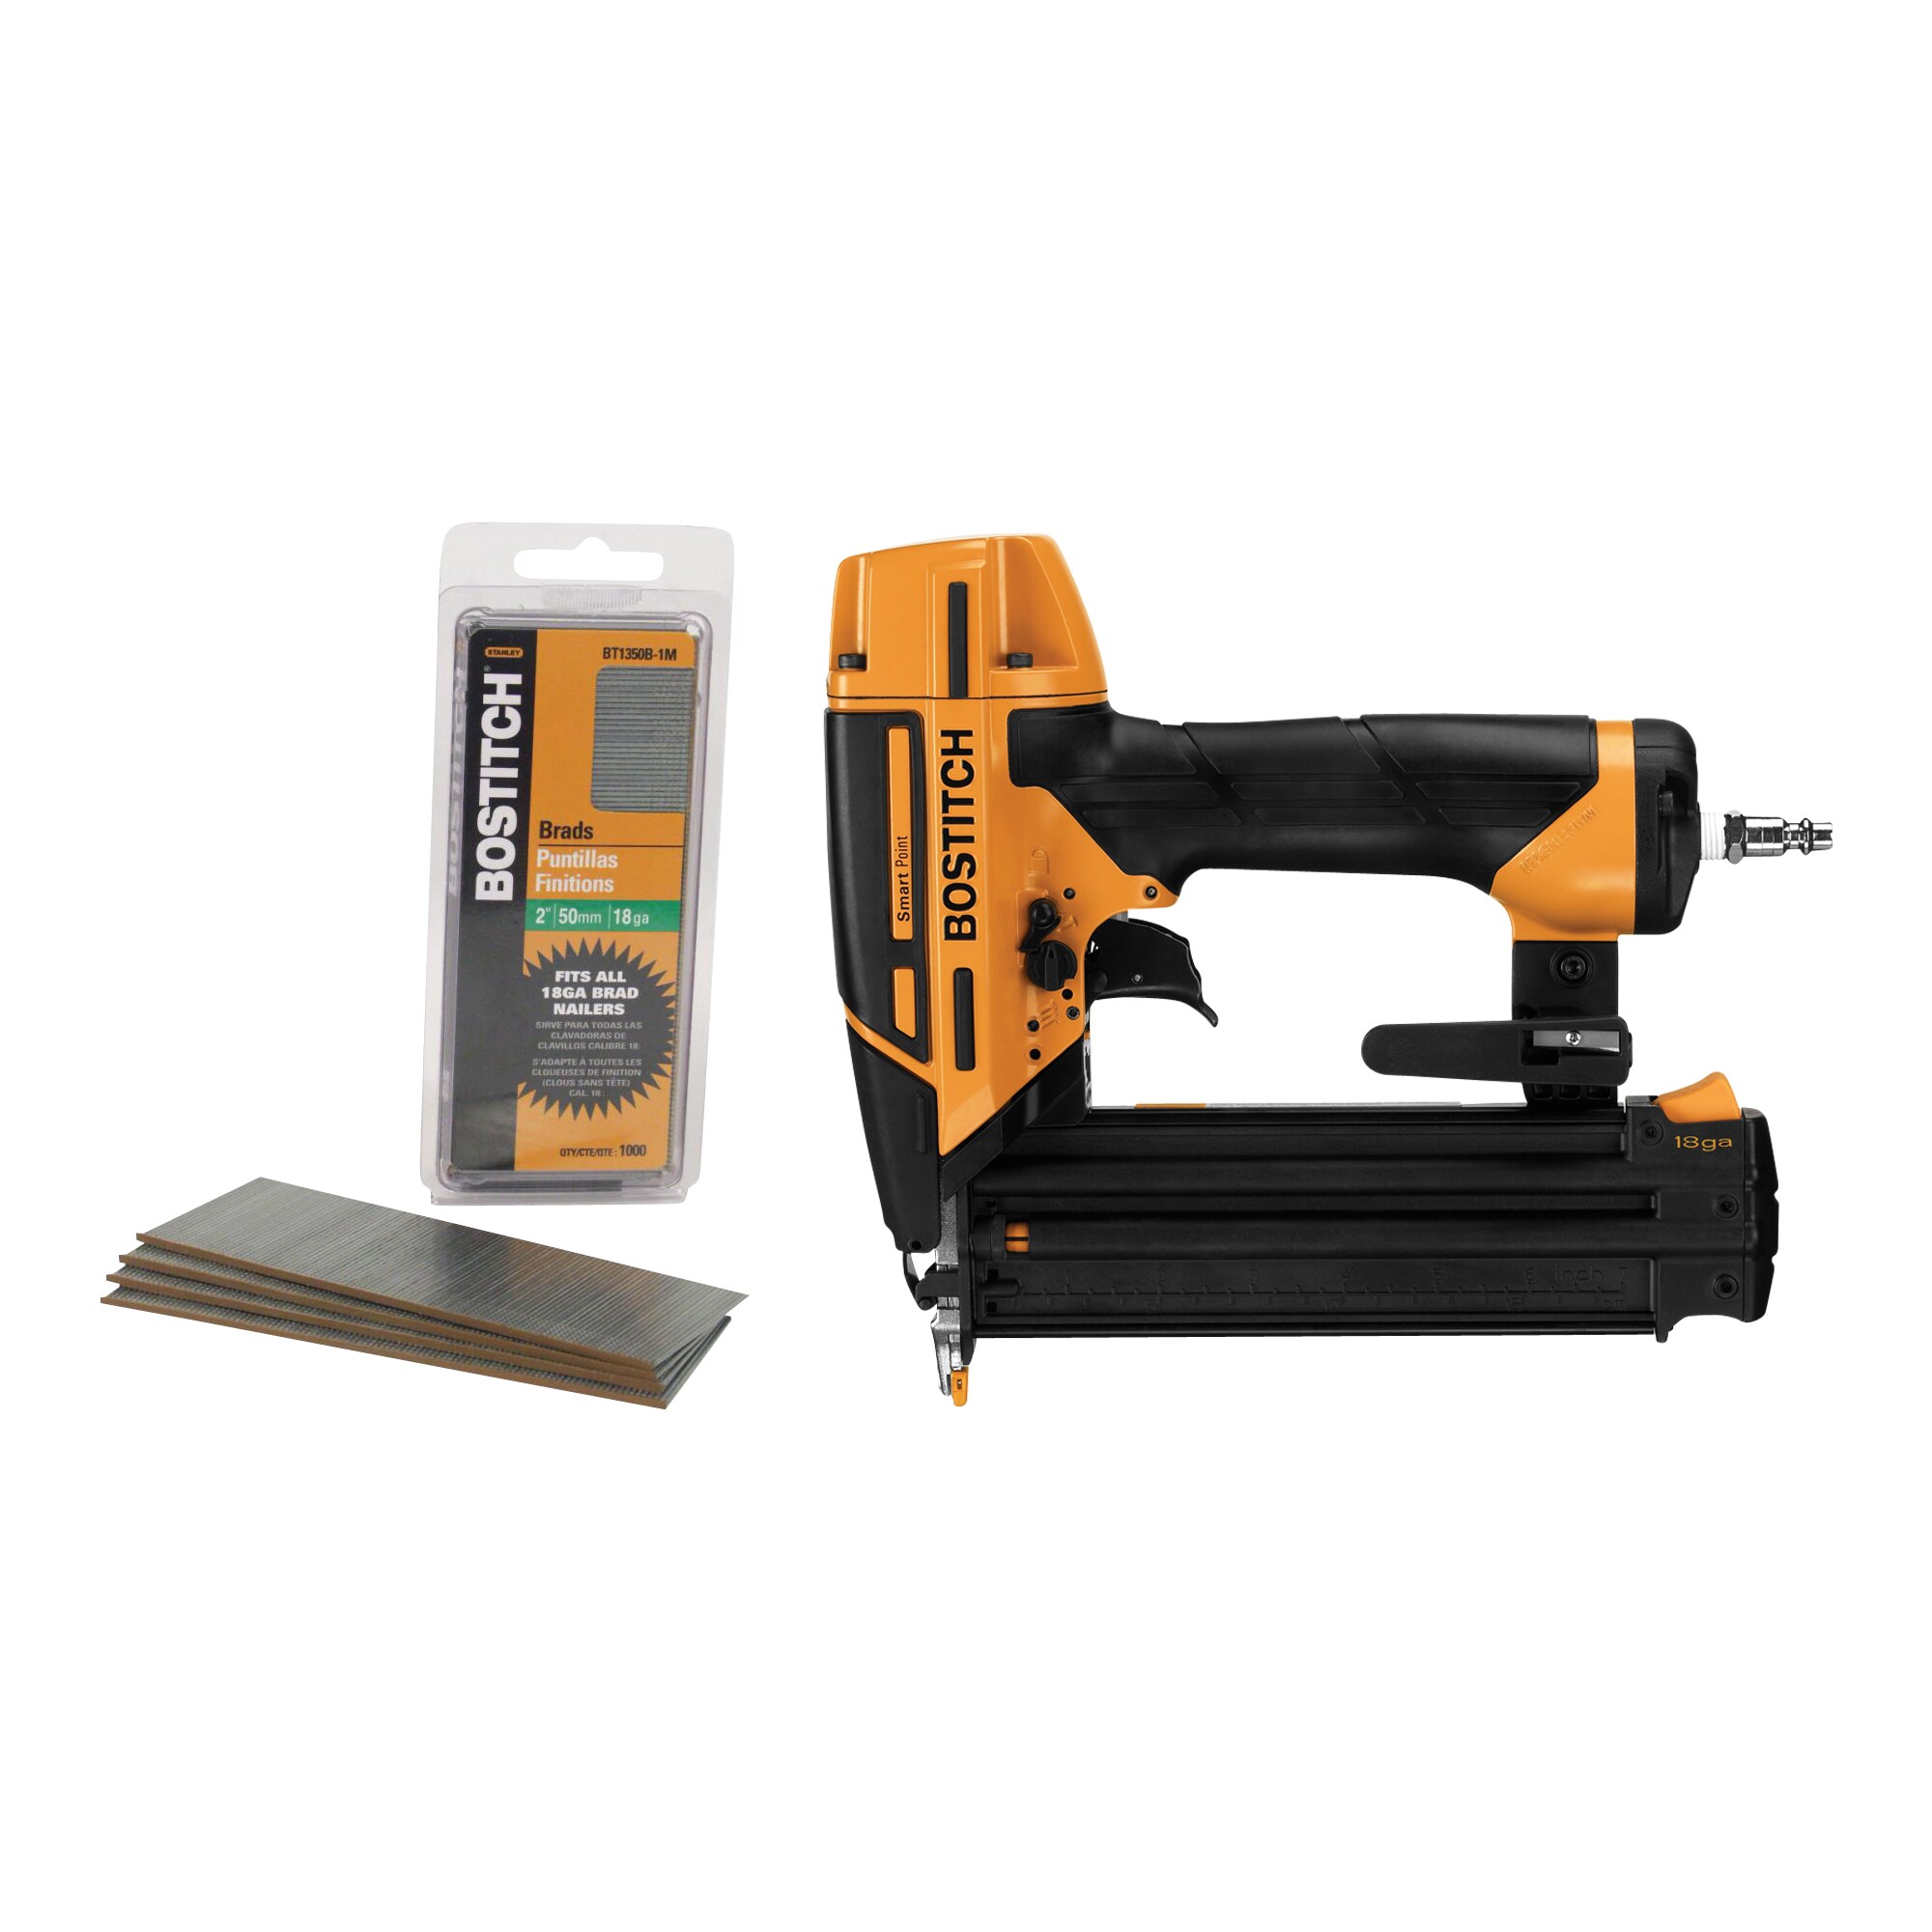 Shop undefined Brad Nailer Tool Collection at Lowes.com